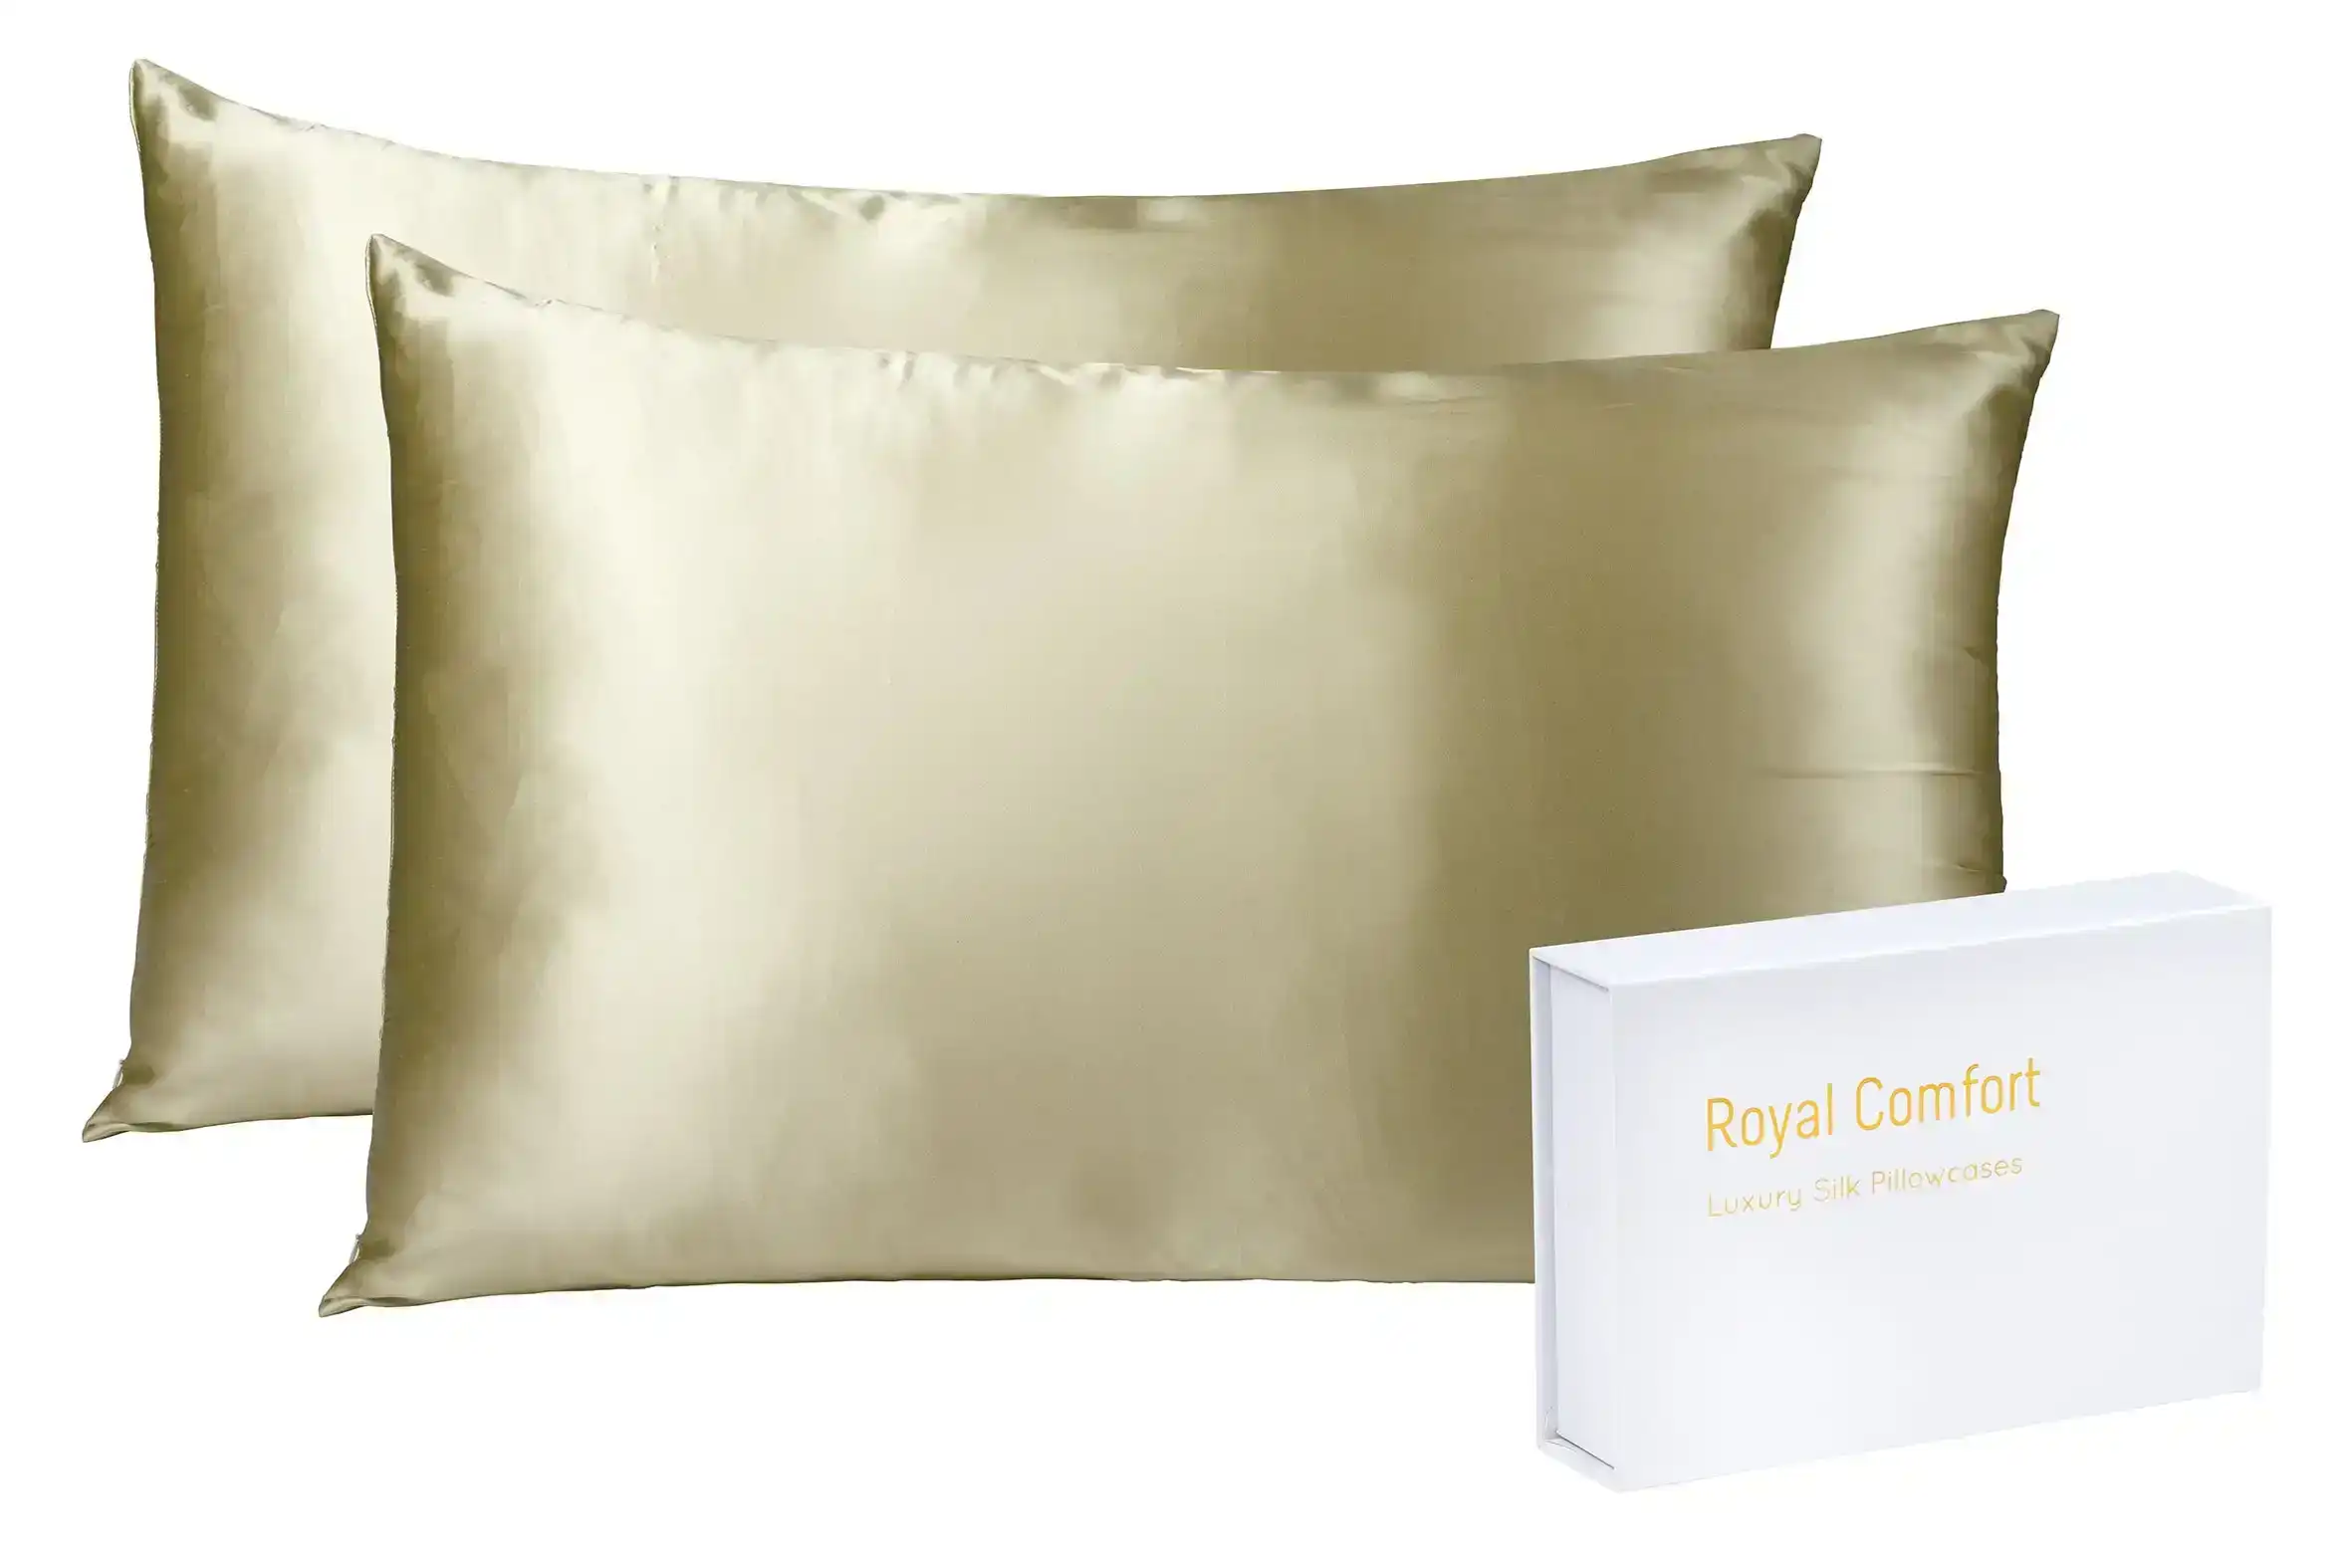 Royal Comfort Mulberry Soft Silk Hypoallergenic Pillowcase Twin Pack 51 X 76Cm - Champagne - One Size